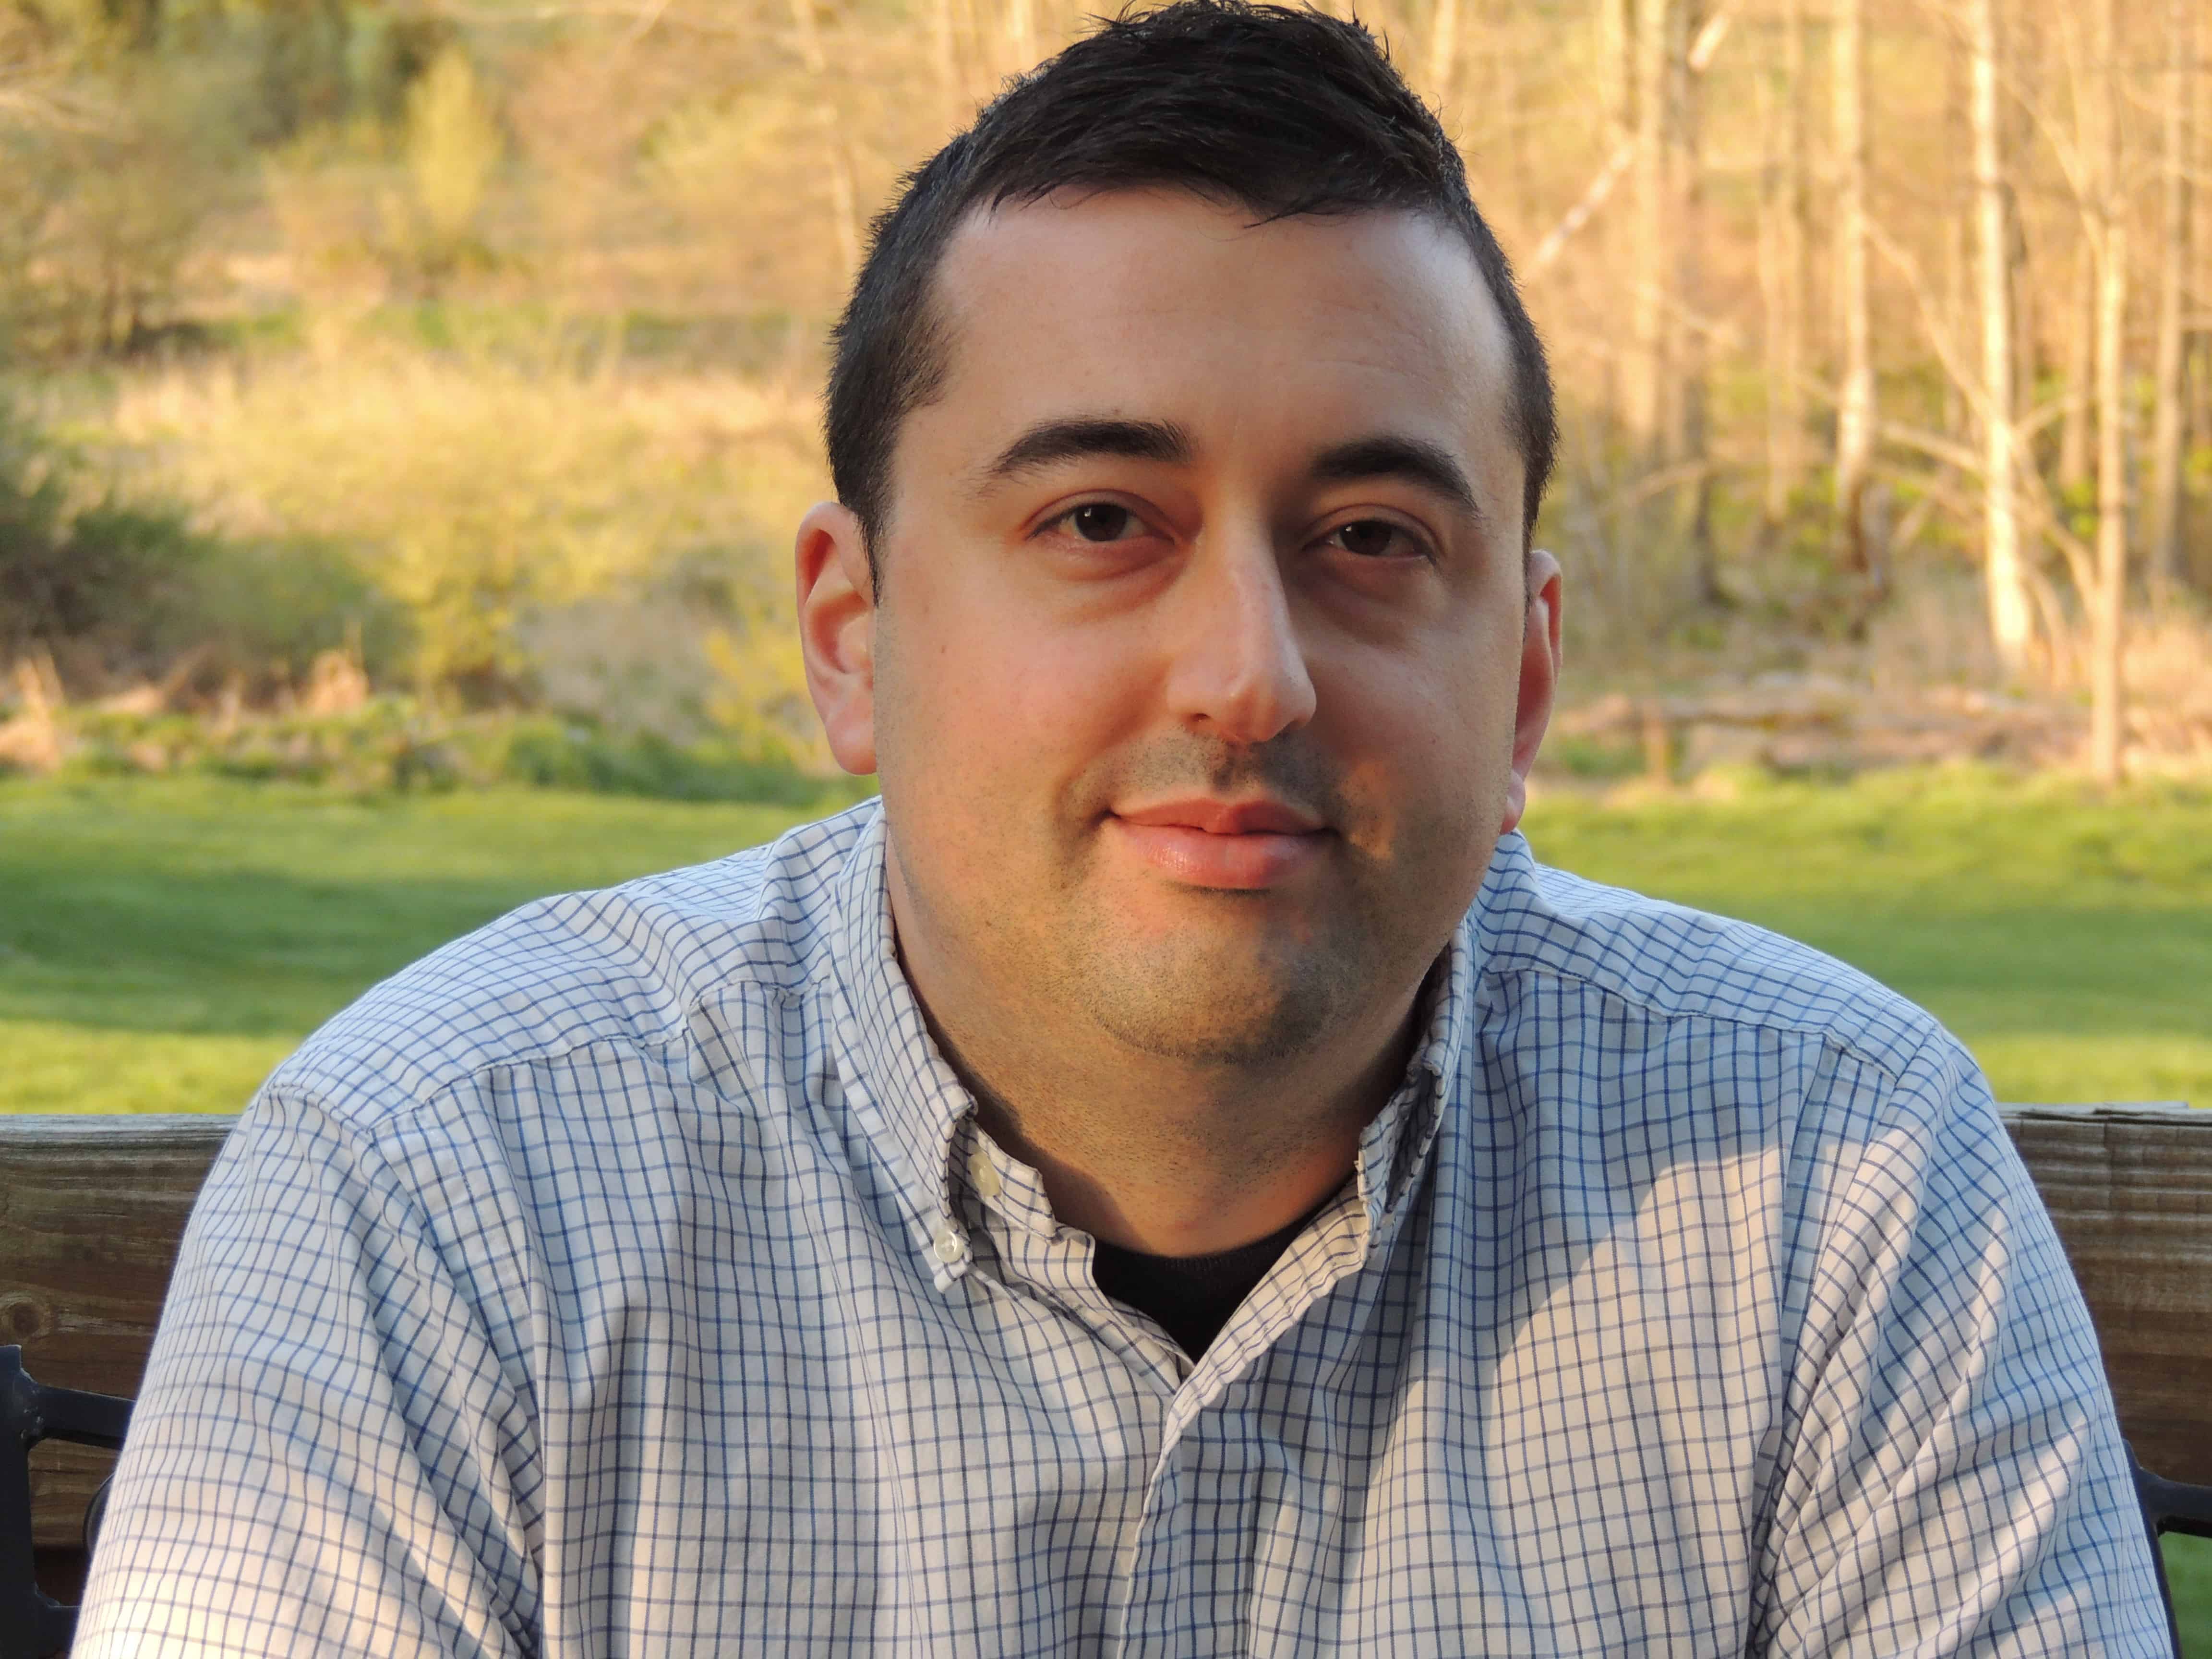 Catholic Writing Today: An Interview with Nick Ripatrazone